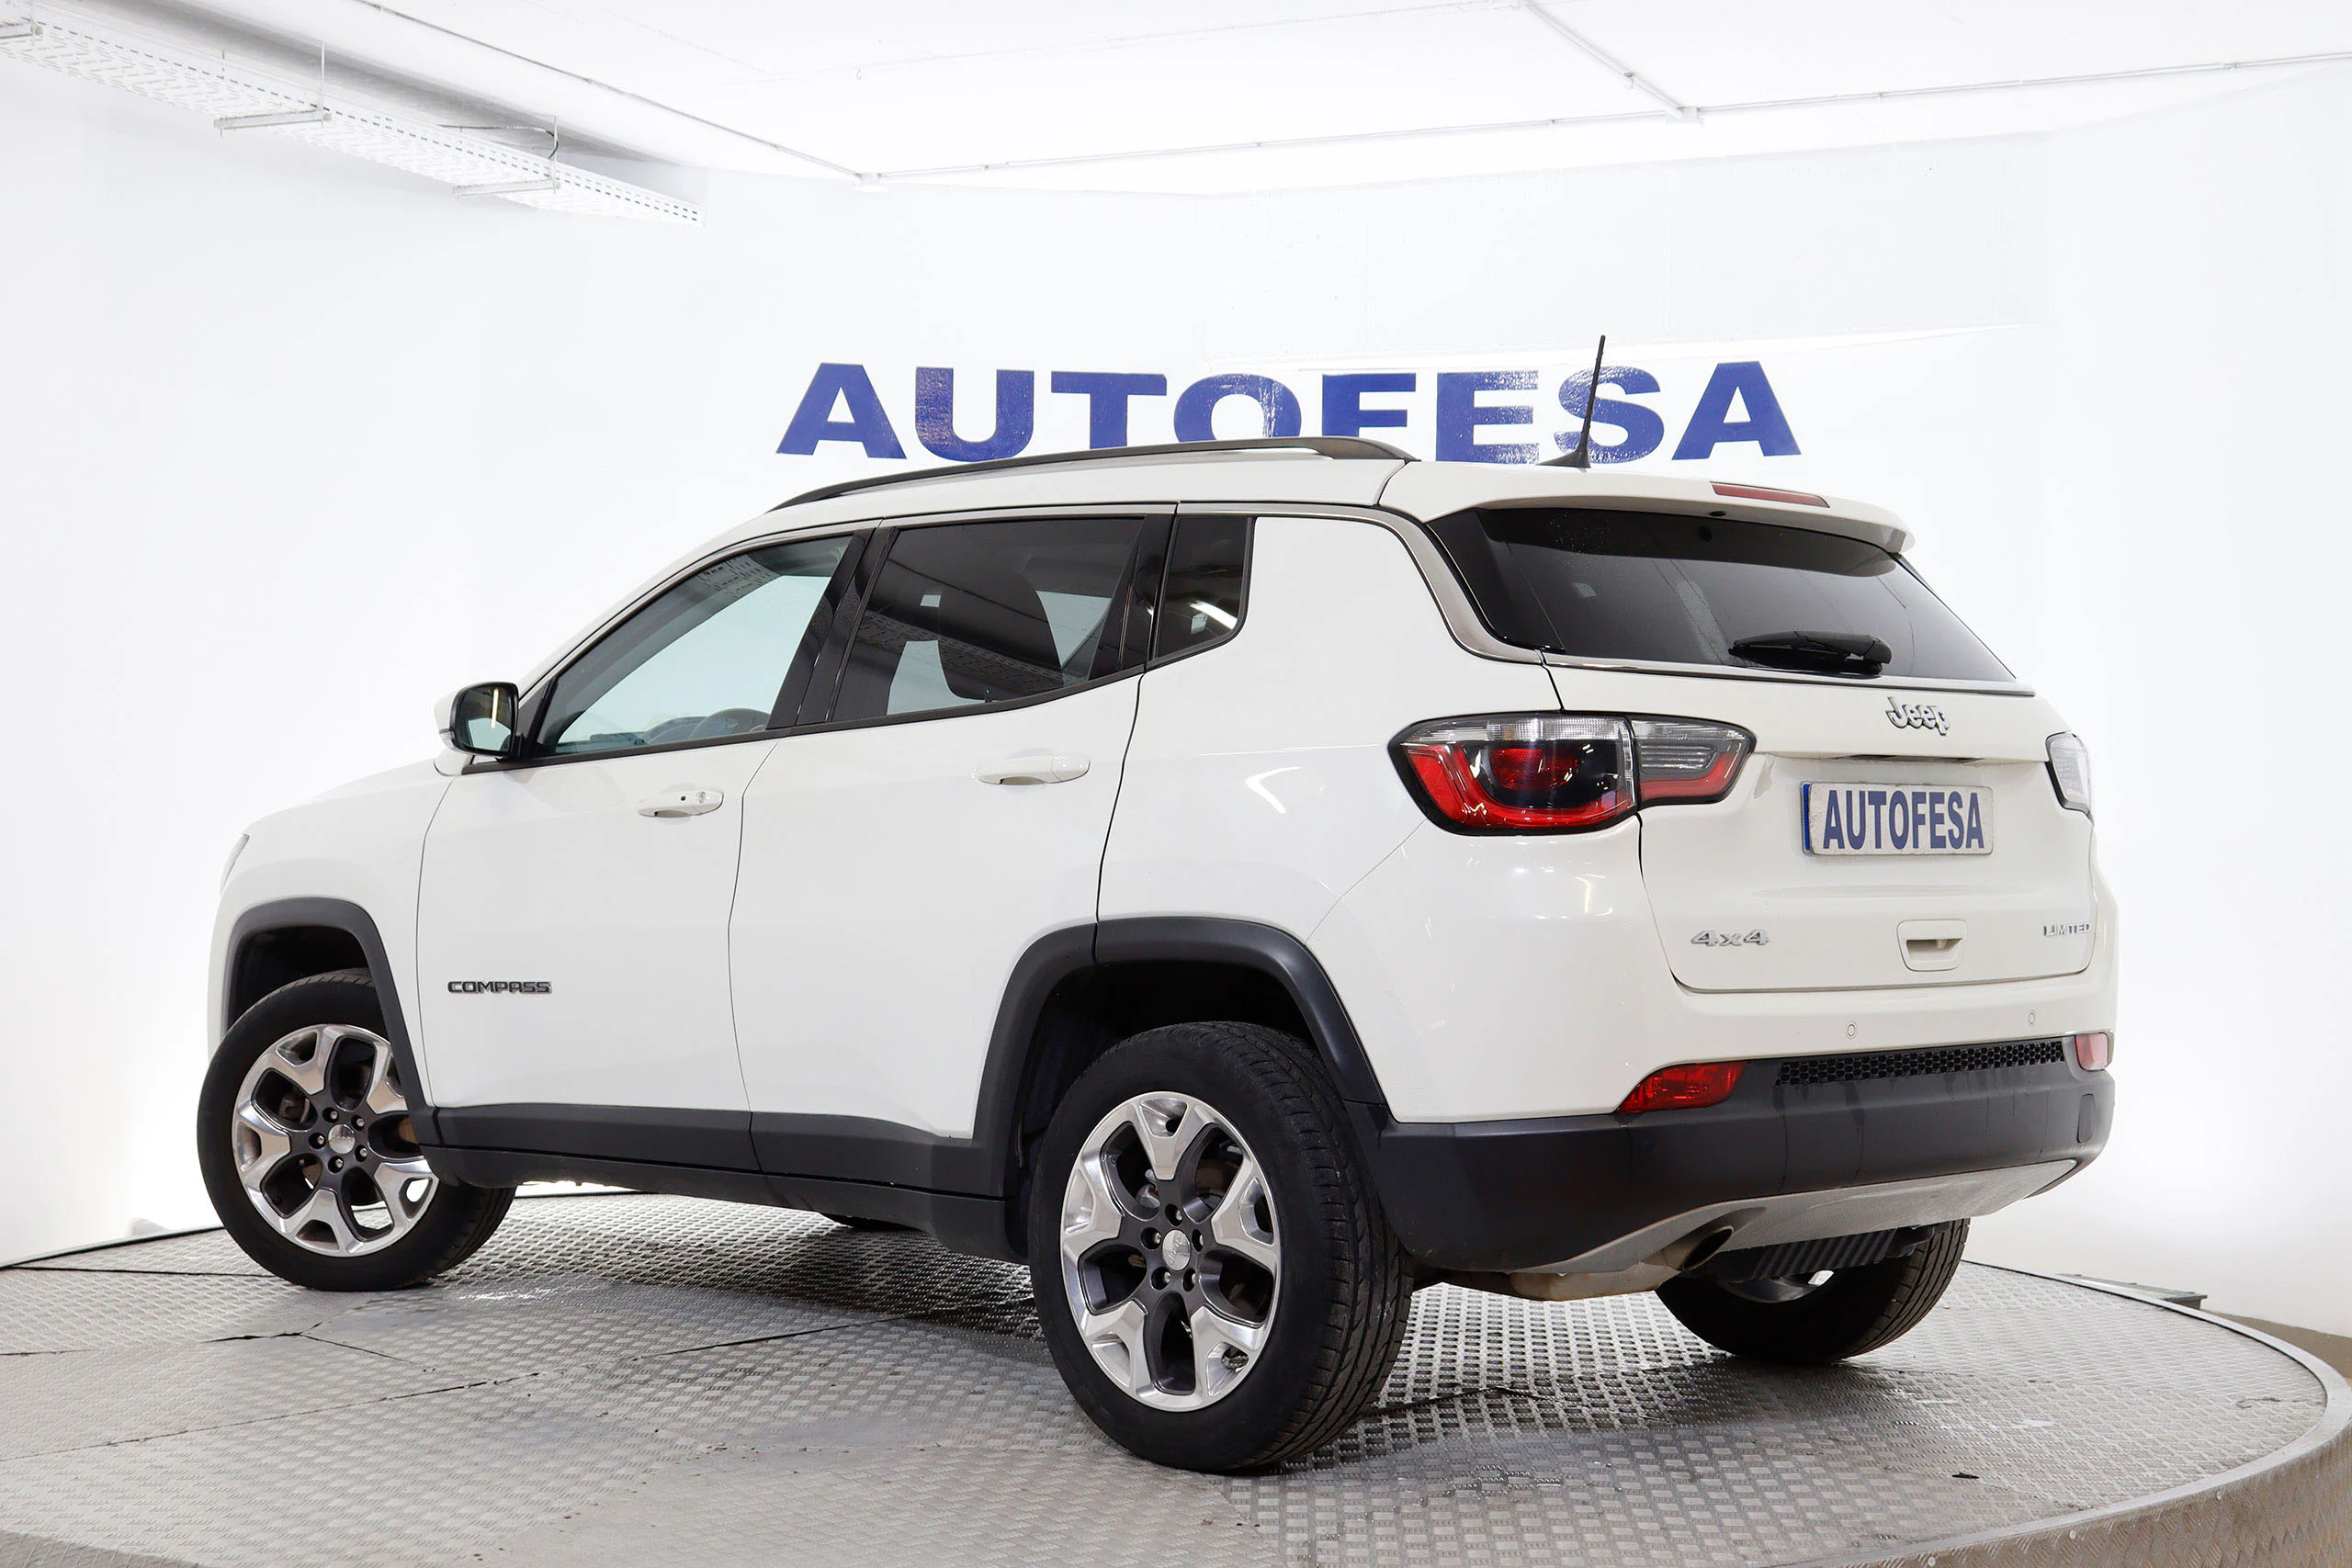 Jeep Compass 2.0 Limited 4X4 170cv Auto 5P S/S # IVA DEDUCIBLE, NAVY, FAROS LED, PARKTRONIC - Foto 9